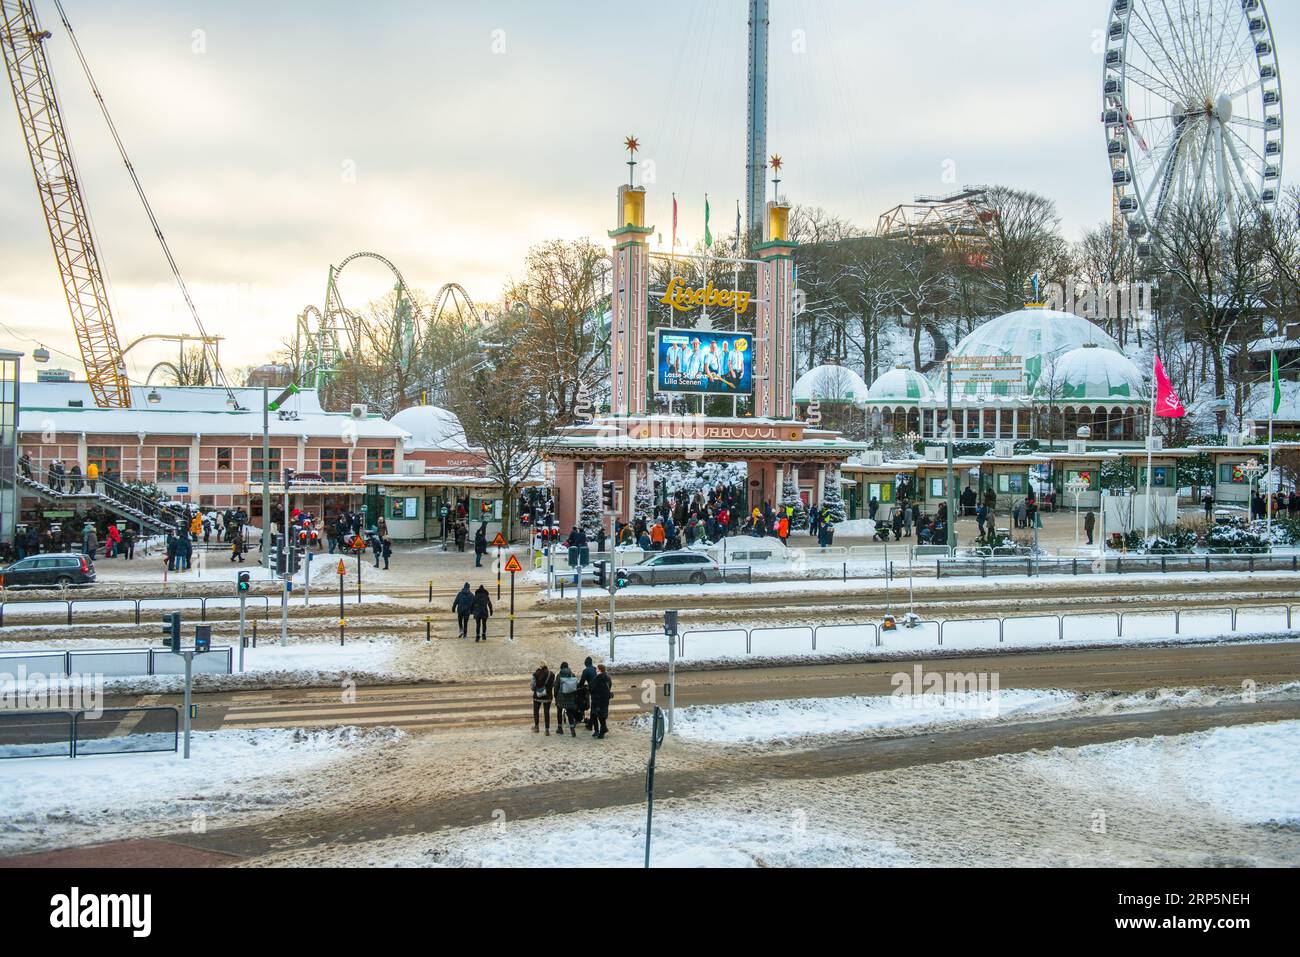 Gothenburg, Sweden - december 05 2021: People queuing by the northern entrance of Liseberg amusement park Stock Photo